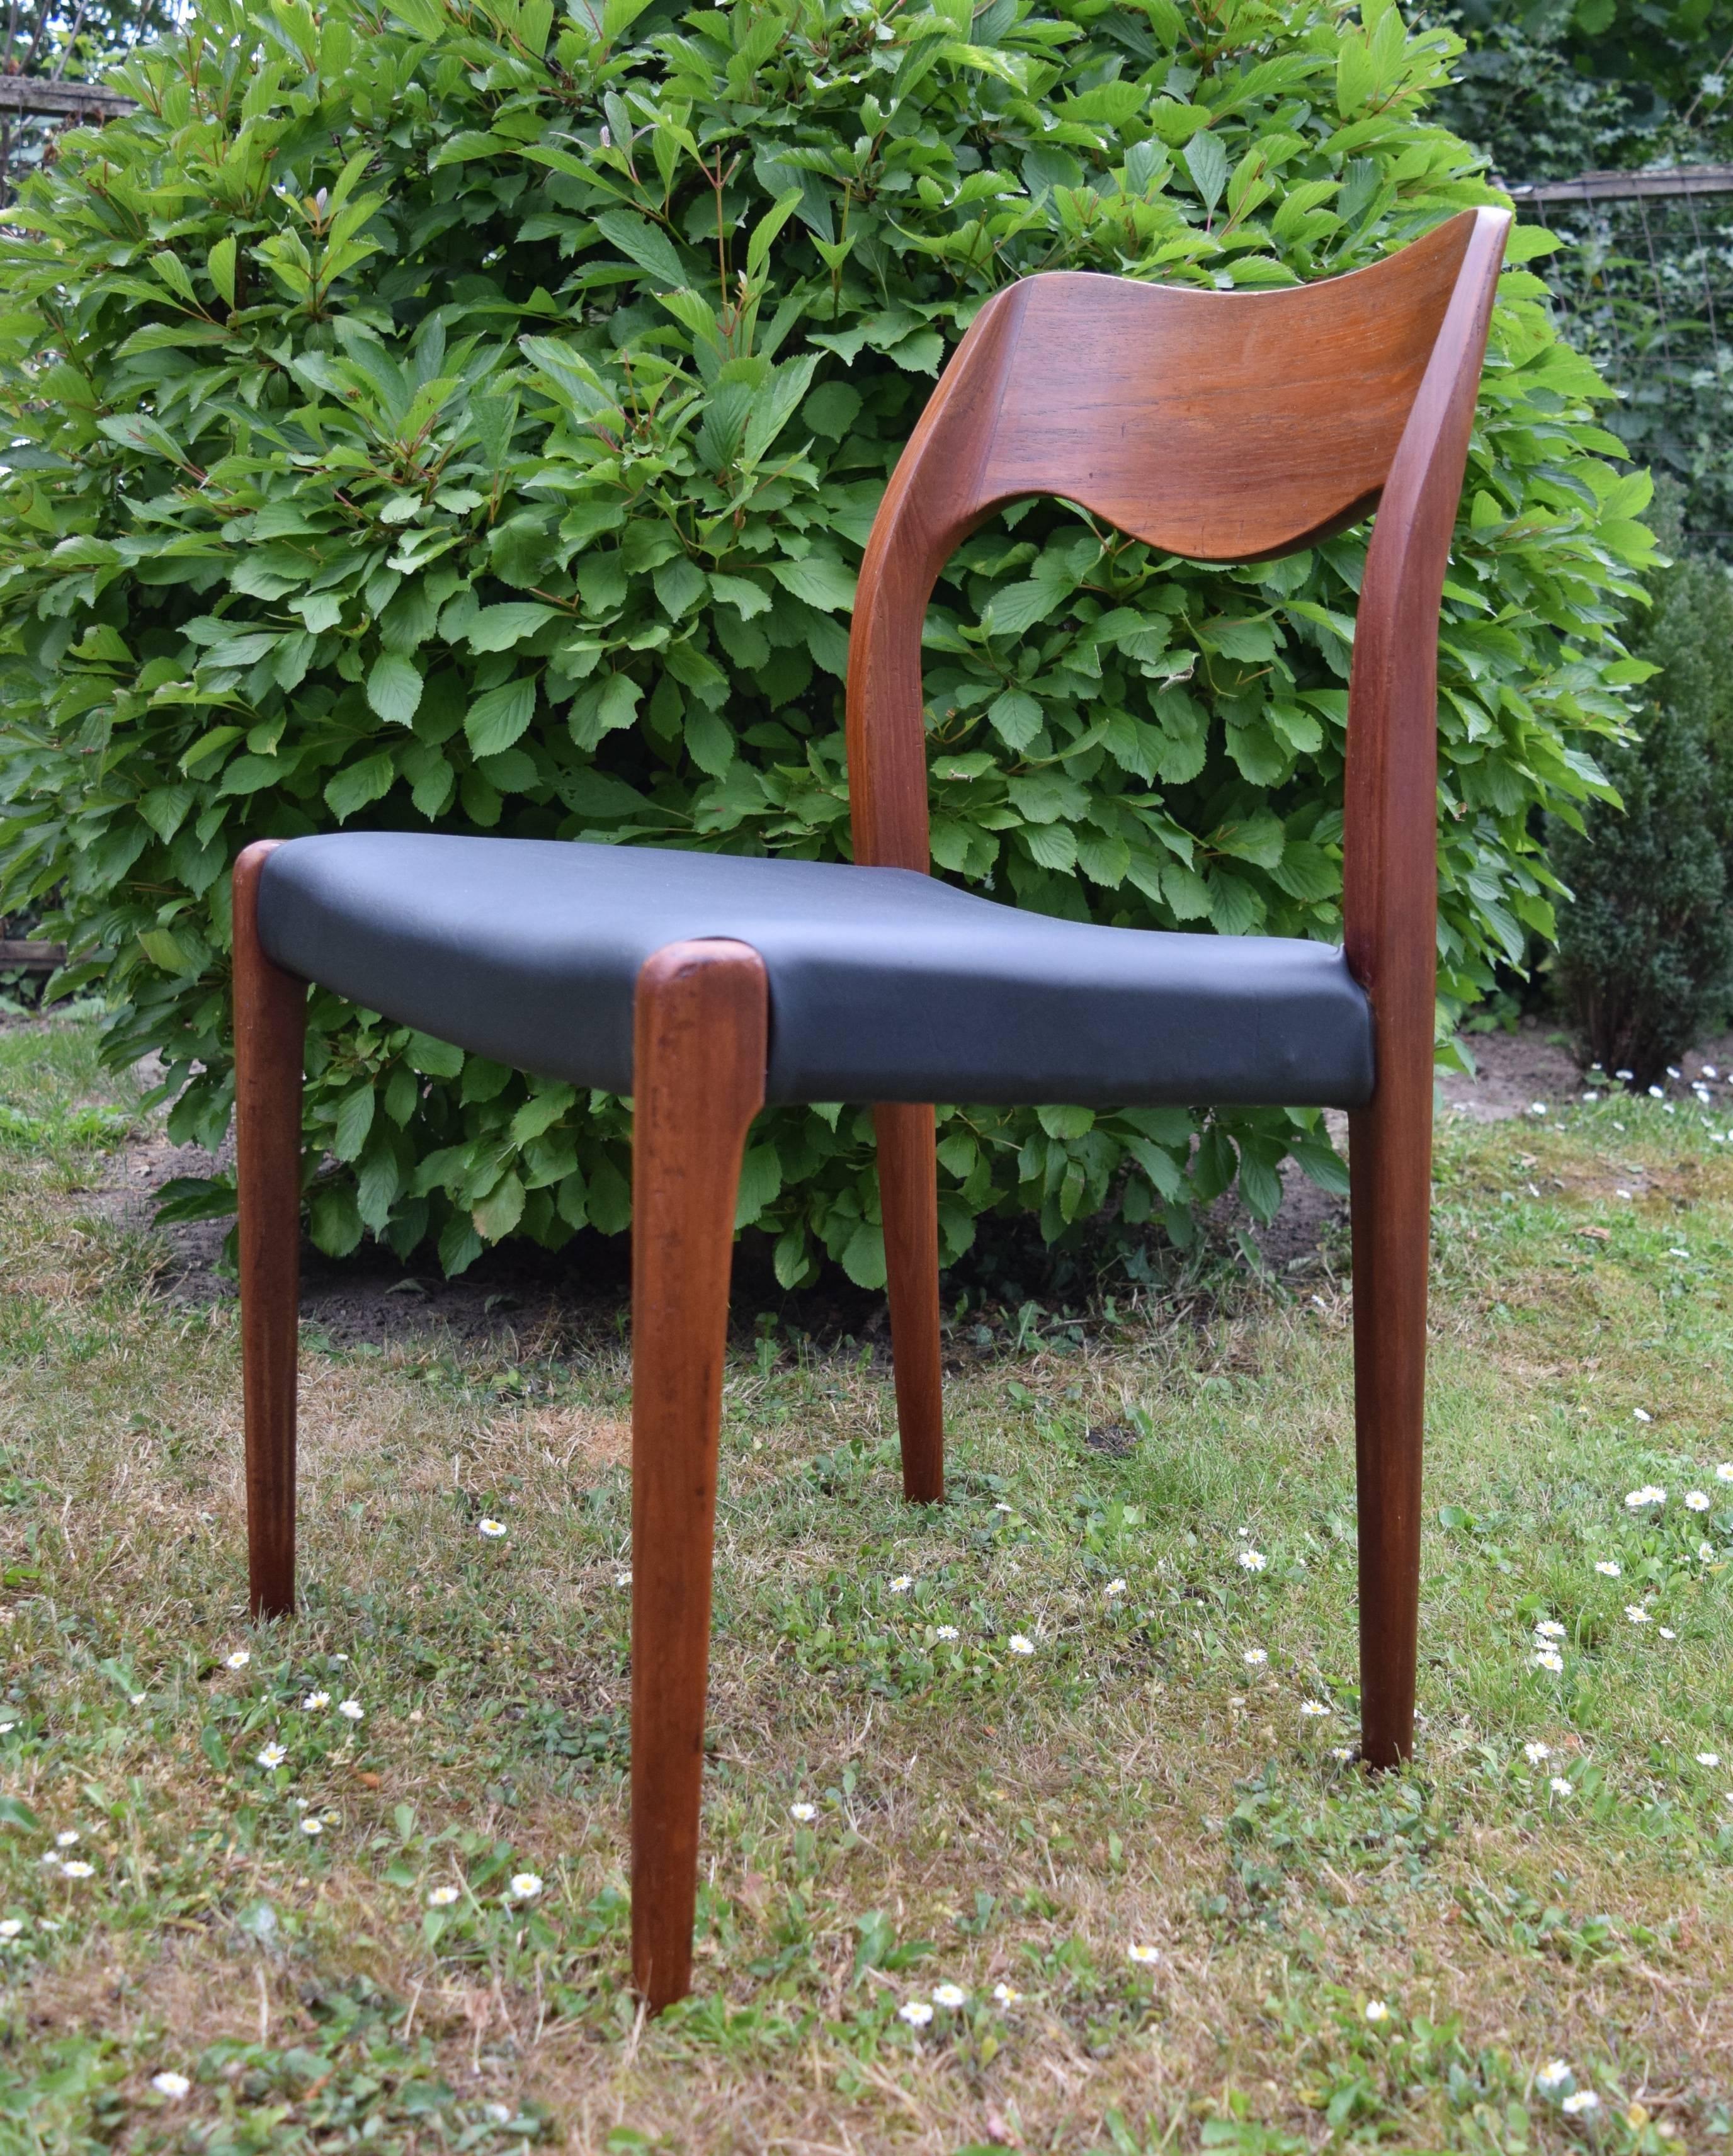 Teak dining chair model 71 designed by Niels Møller in Denmark in 1951. This particular example has been recently covered in high quality black vinyl. Apart from some marks on the frame this chair is in a good condition.